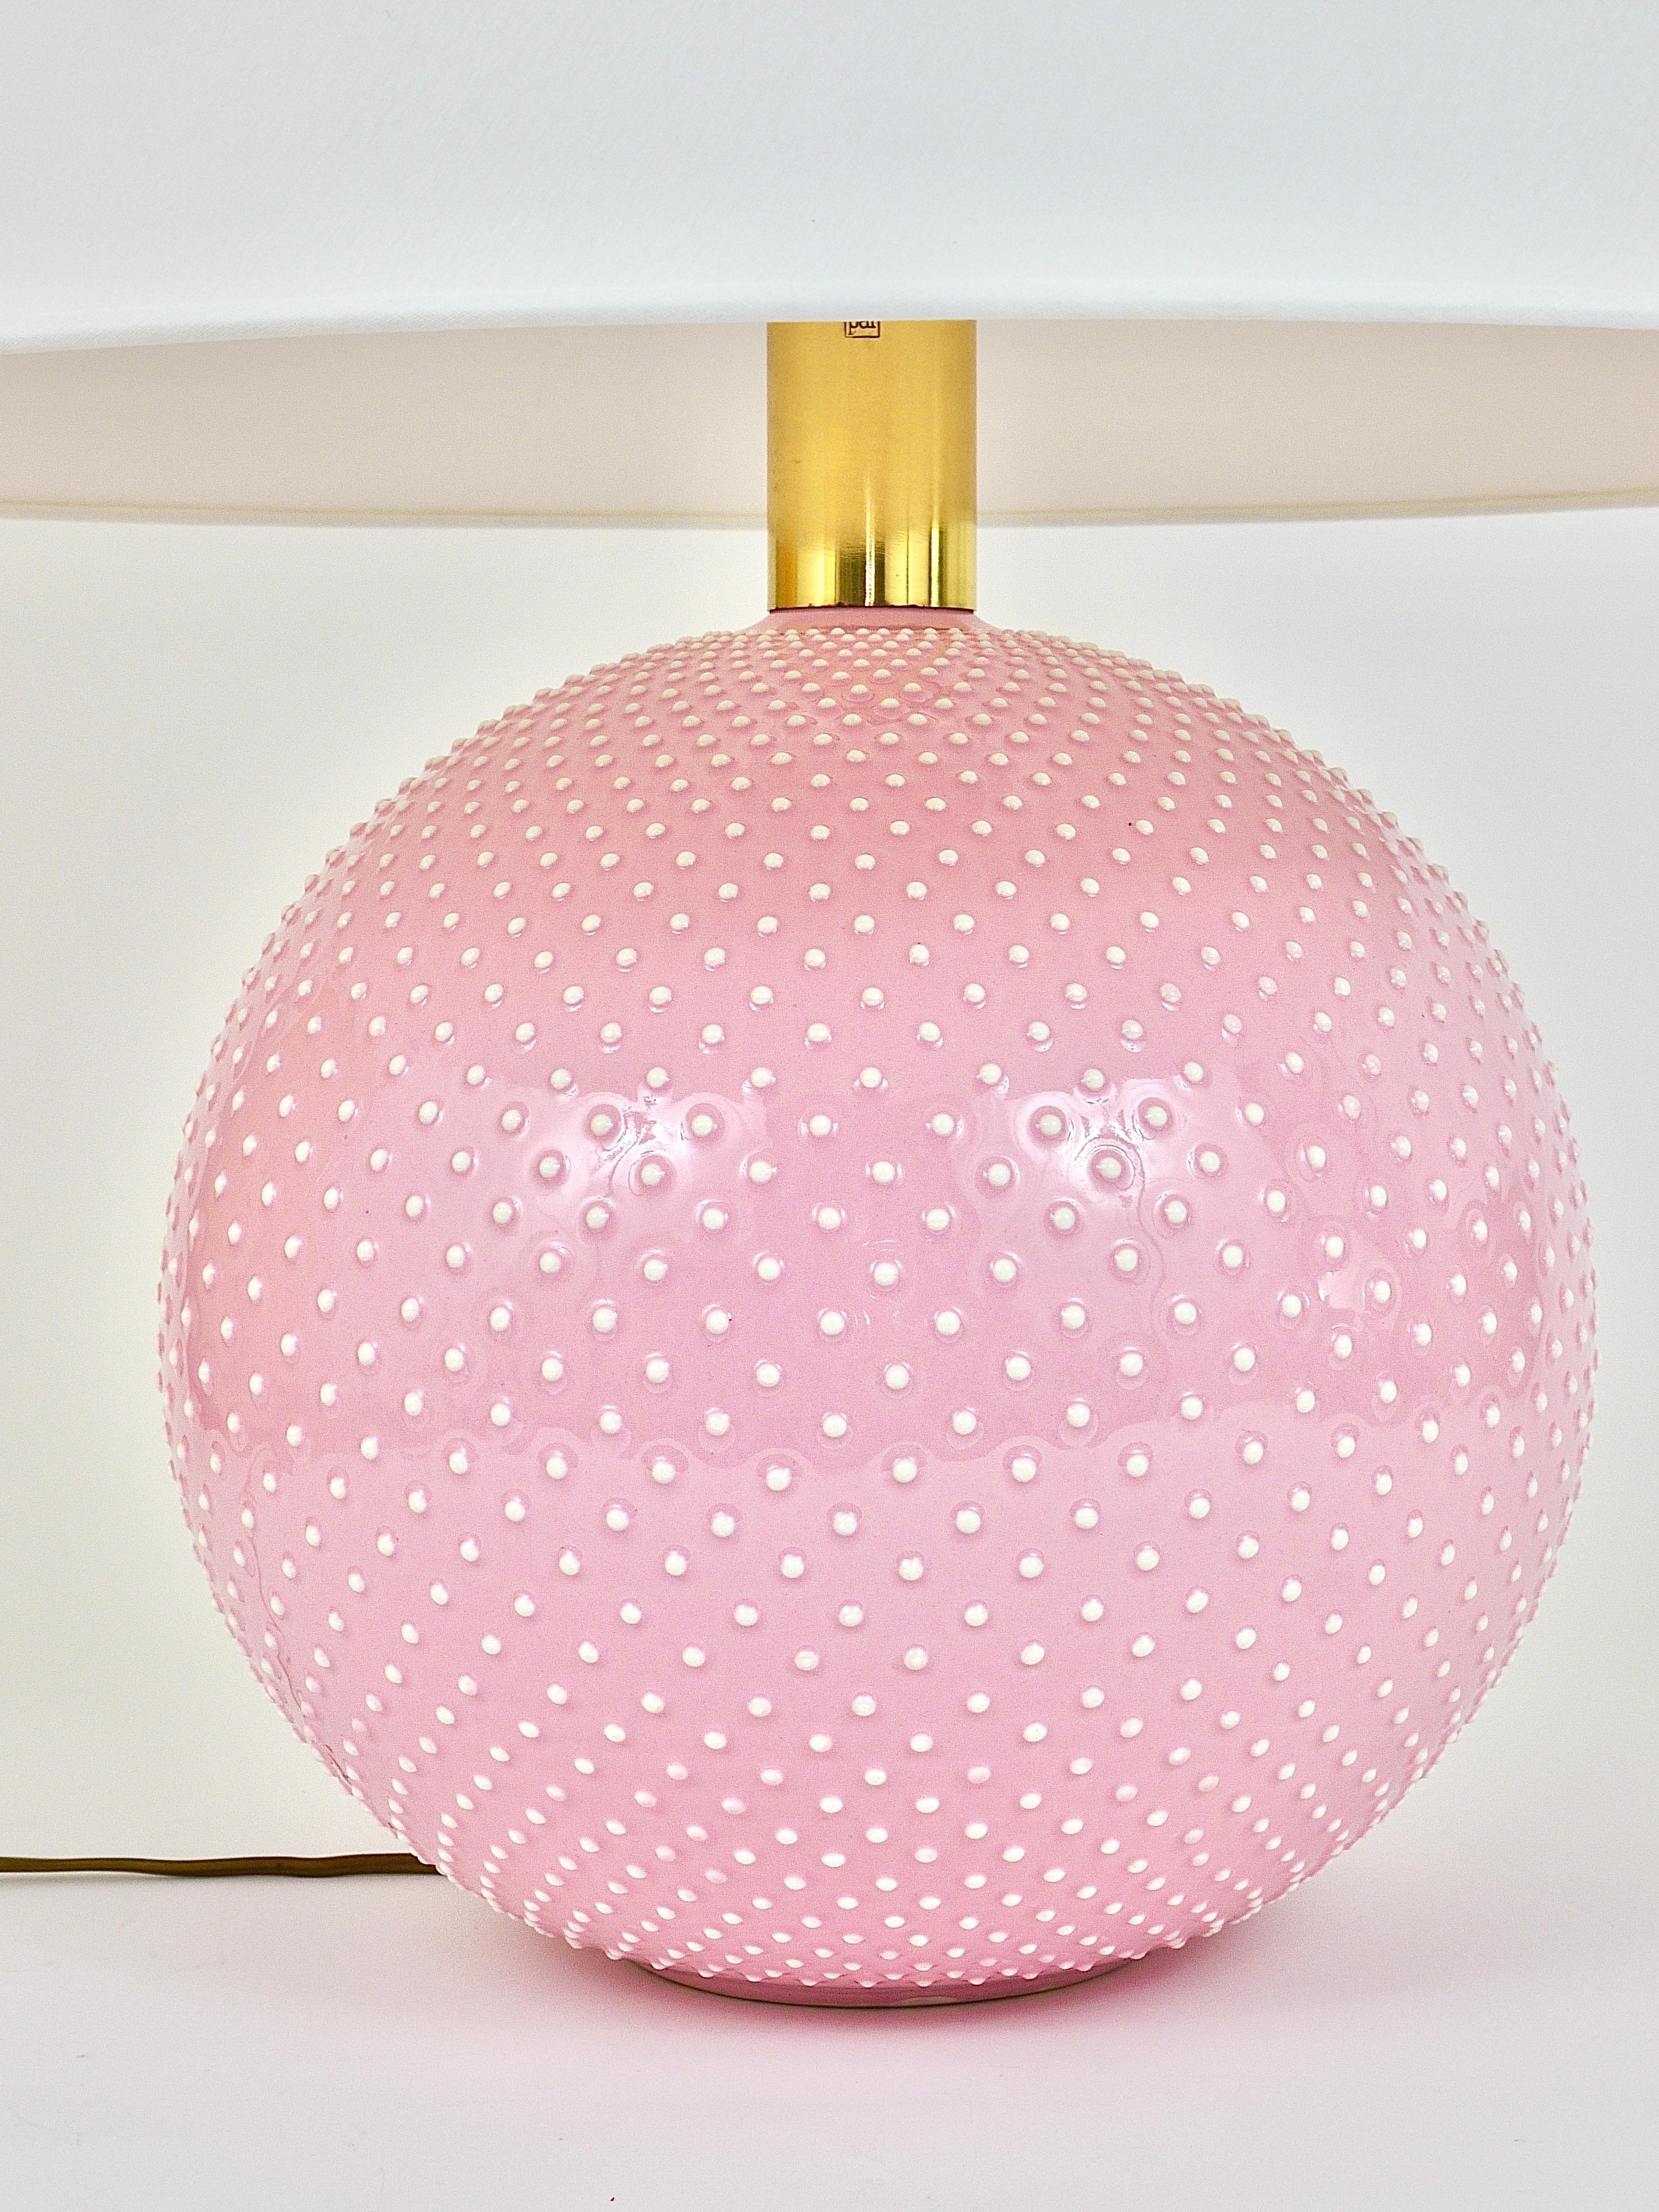 Rosé Pastel Polka Dot Sphere Table Lamp, Ceramic, Brass, Studio Paf Milano, 1970 In Good Condition For Sale In Vienna, AT